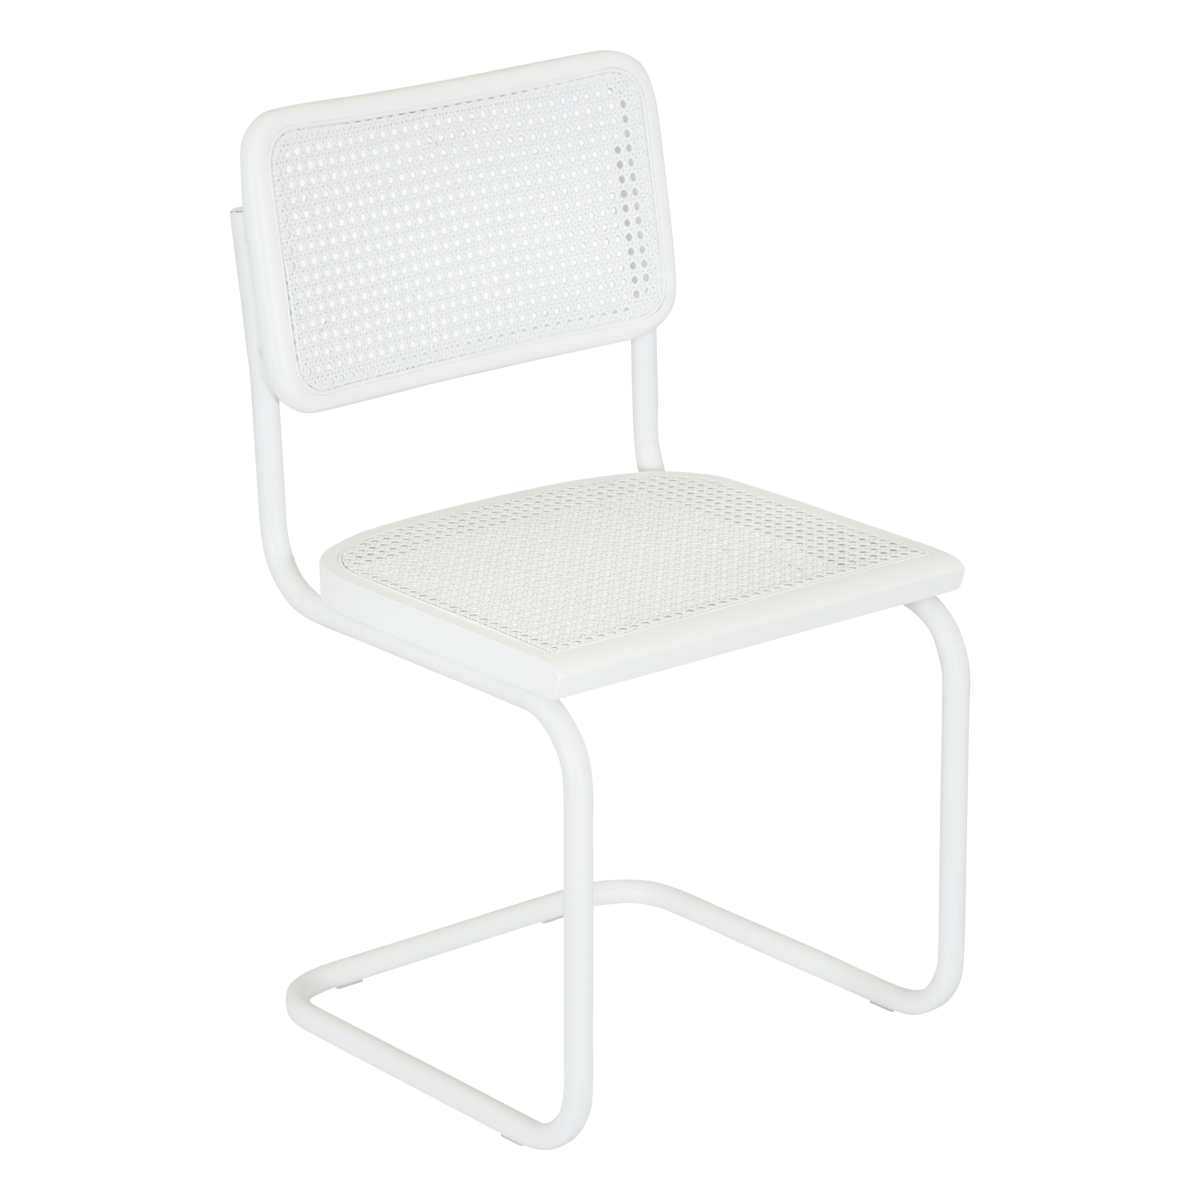 Picture of Breuer Chair Company UNB-BCC-CSCA-SC-WHTF-WHTW-WHTC Marcel Breuer B32 Cesca Cane Cantilever Side Chair w/ White Steel Frame White Wood &amp; White Cane (Made in Italy) by Furnish Theory